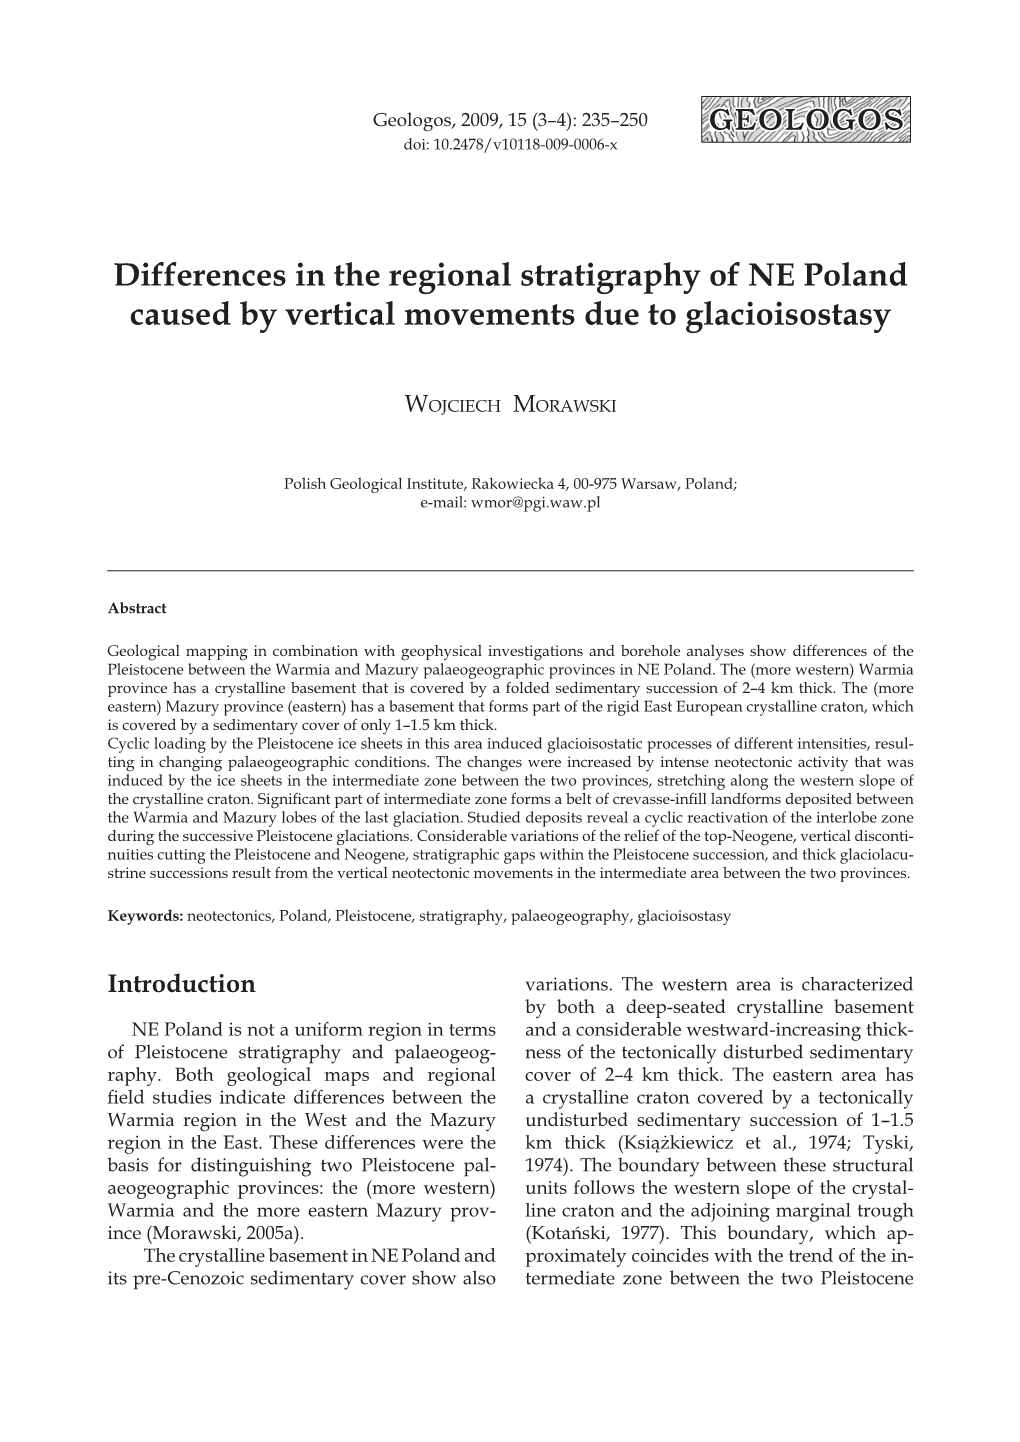 Differences in the Regional Stratigraphy of NE Poland Caused by Vertical Movements Due to Glacioisostasy